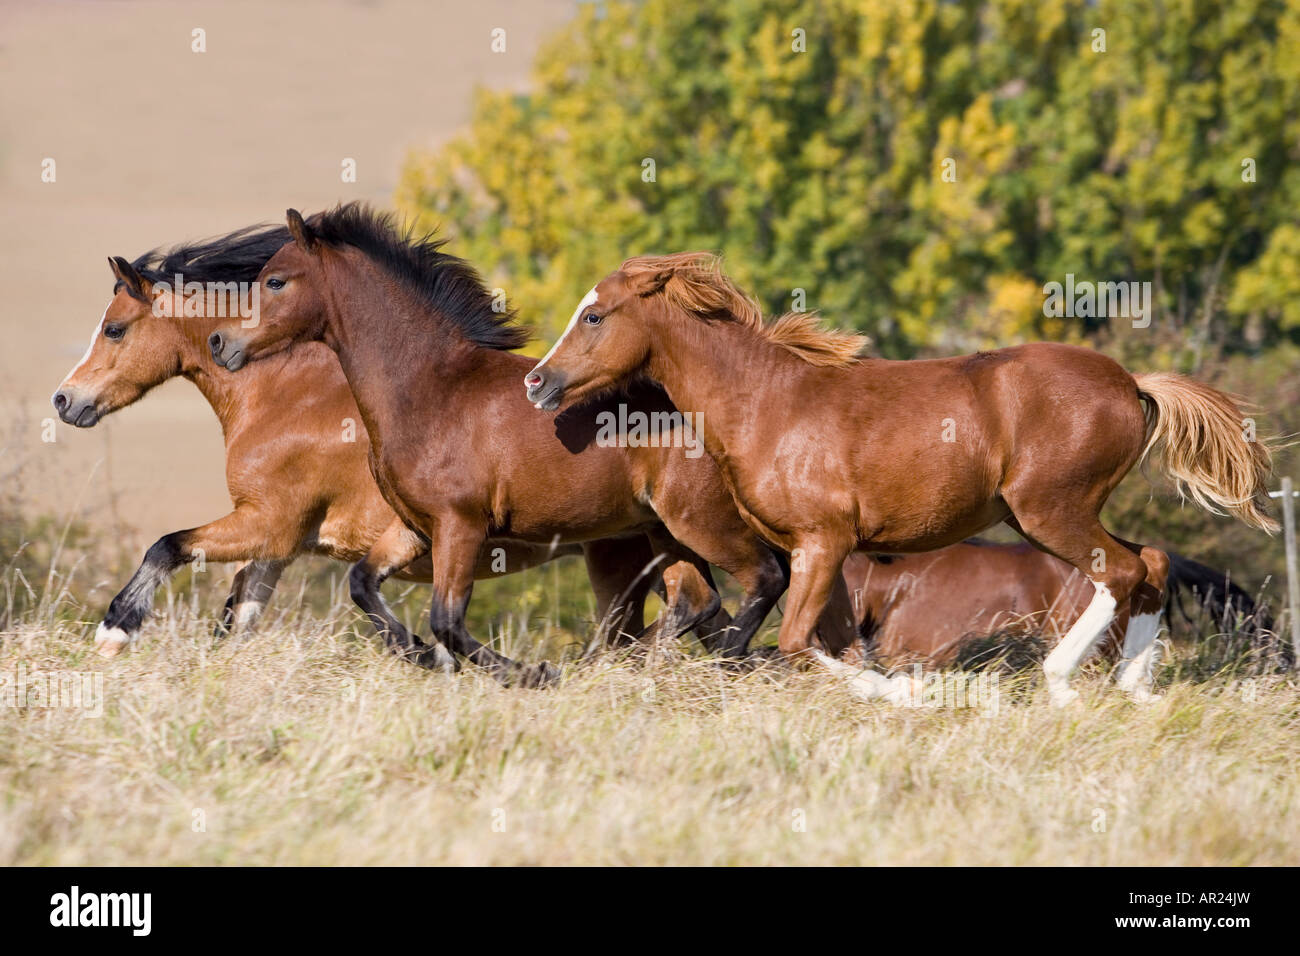 Welsh Pony. Herd in a gallop on a meadow Stock Photo